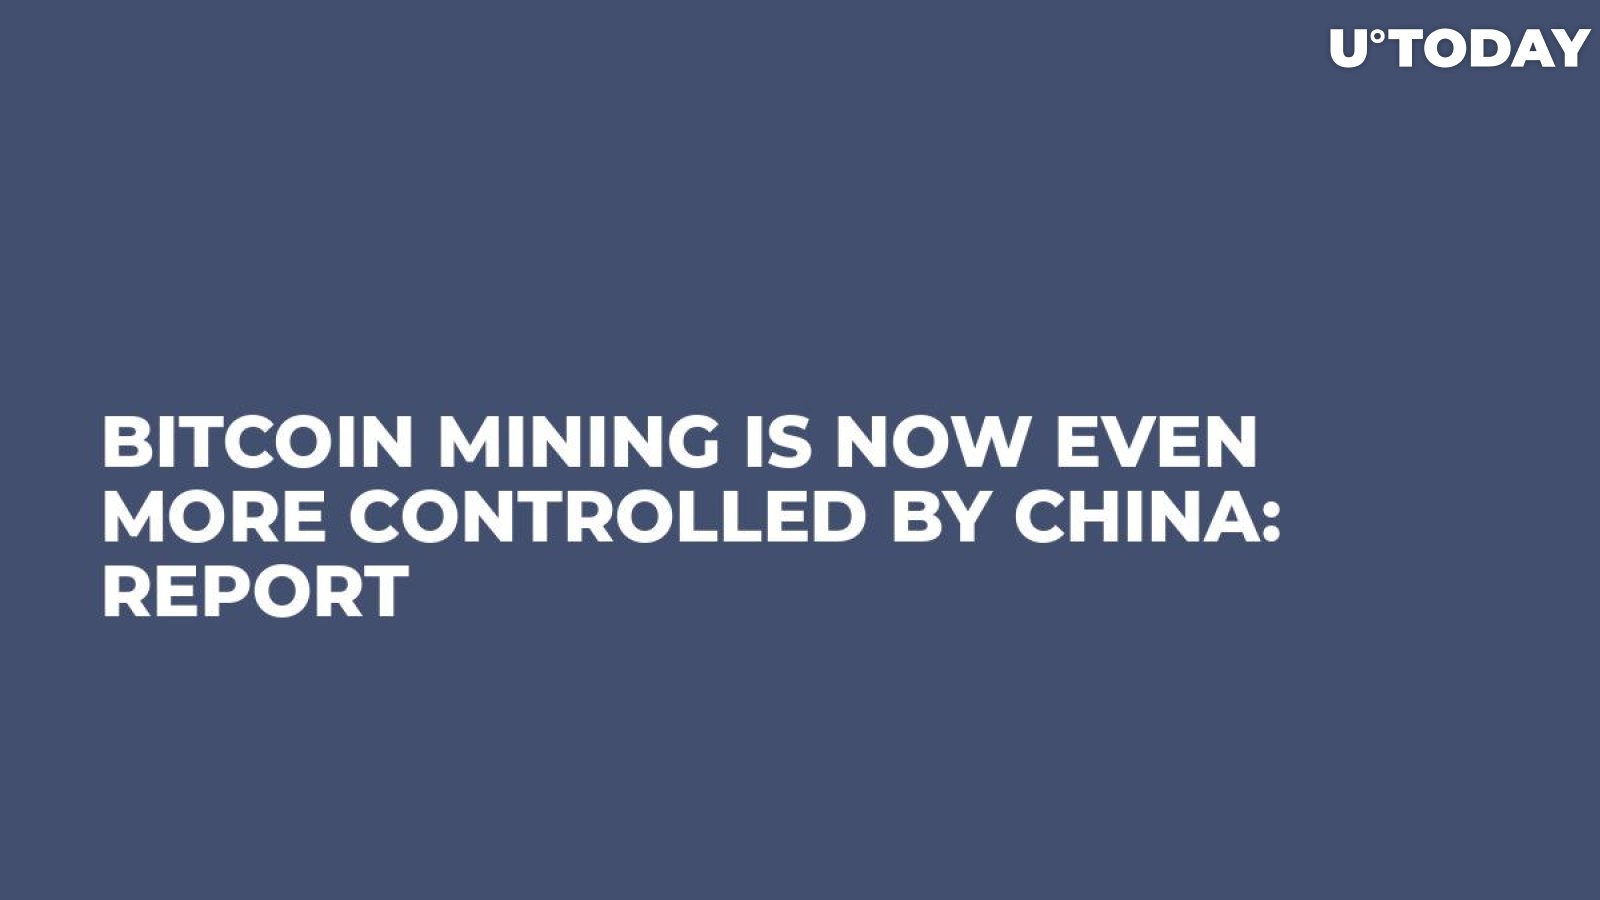 Bitcoin Mining Is Now Even More Controlled by China: Report